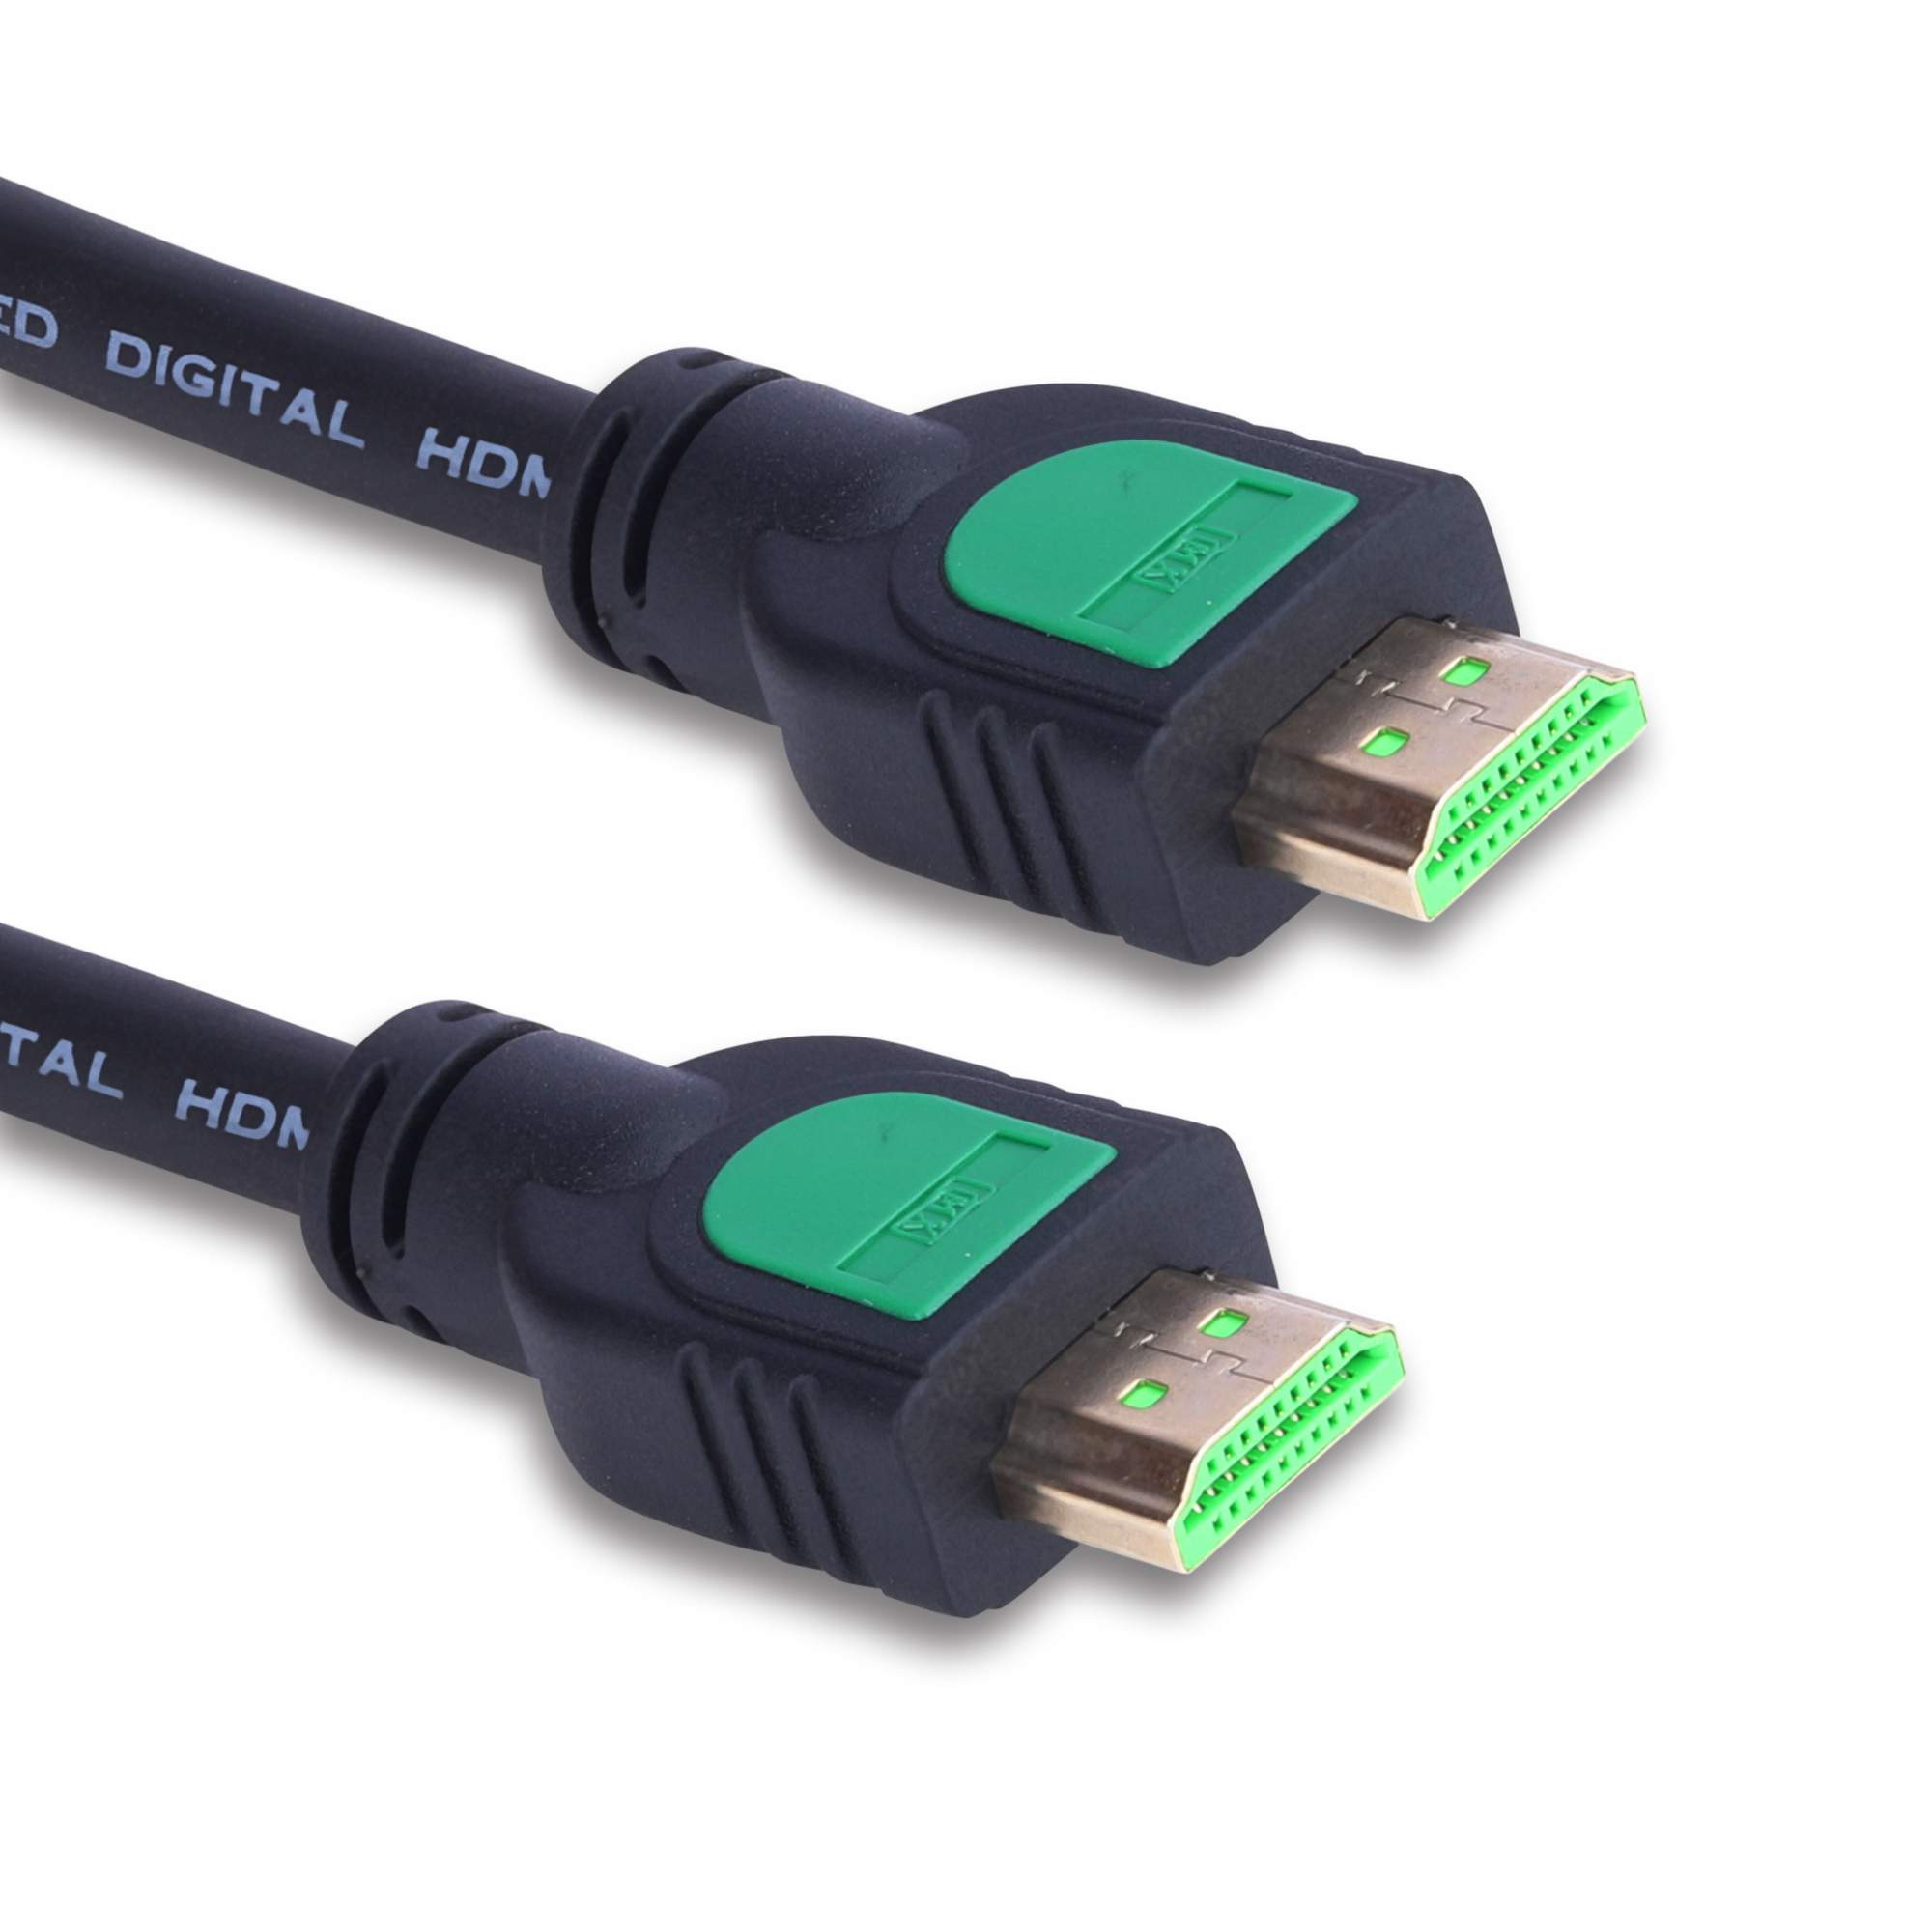 MX HDMI Male to HDMI Male Cord 2.0 V (3 Meter) 19pin High Speed HDMI Cable Supports 4K@60MHz, 2160p, 1080p & 3D and Audio Return for TV, Laptop, PC